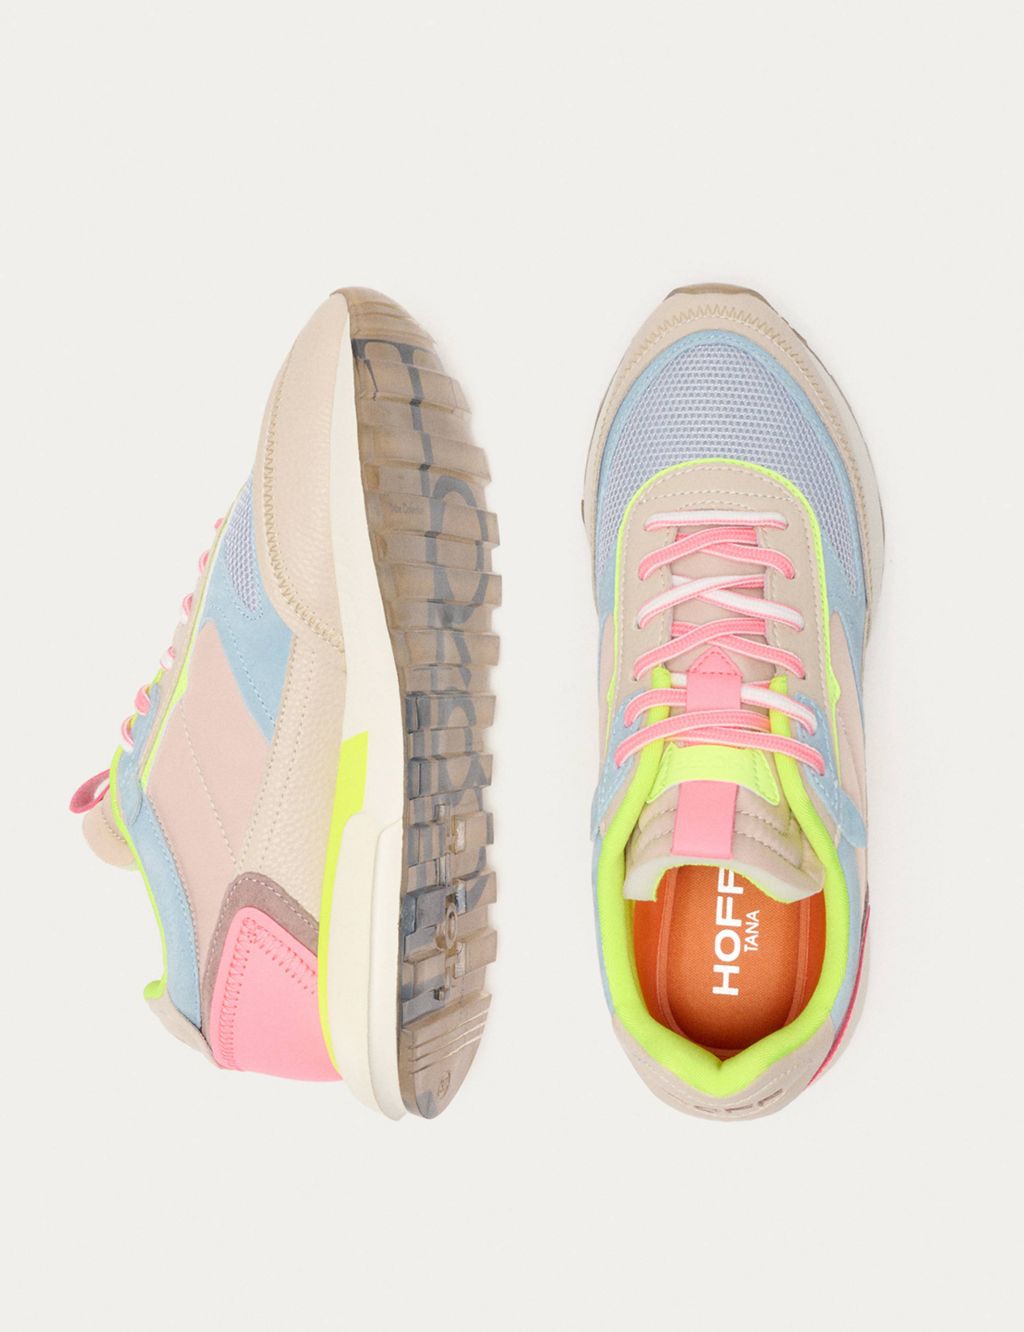 Tribe Trainers image 3